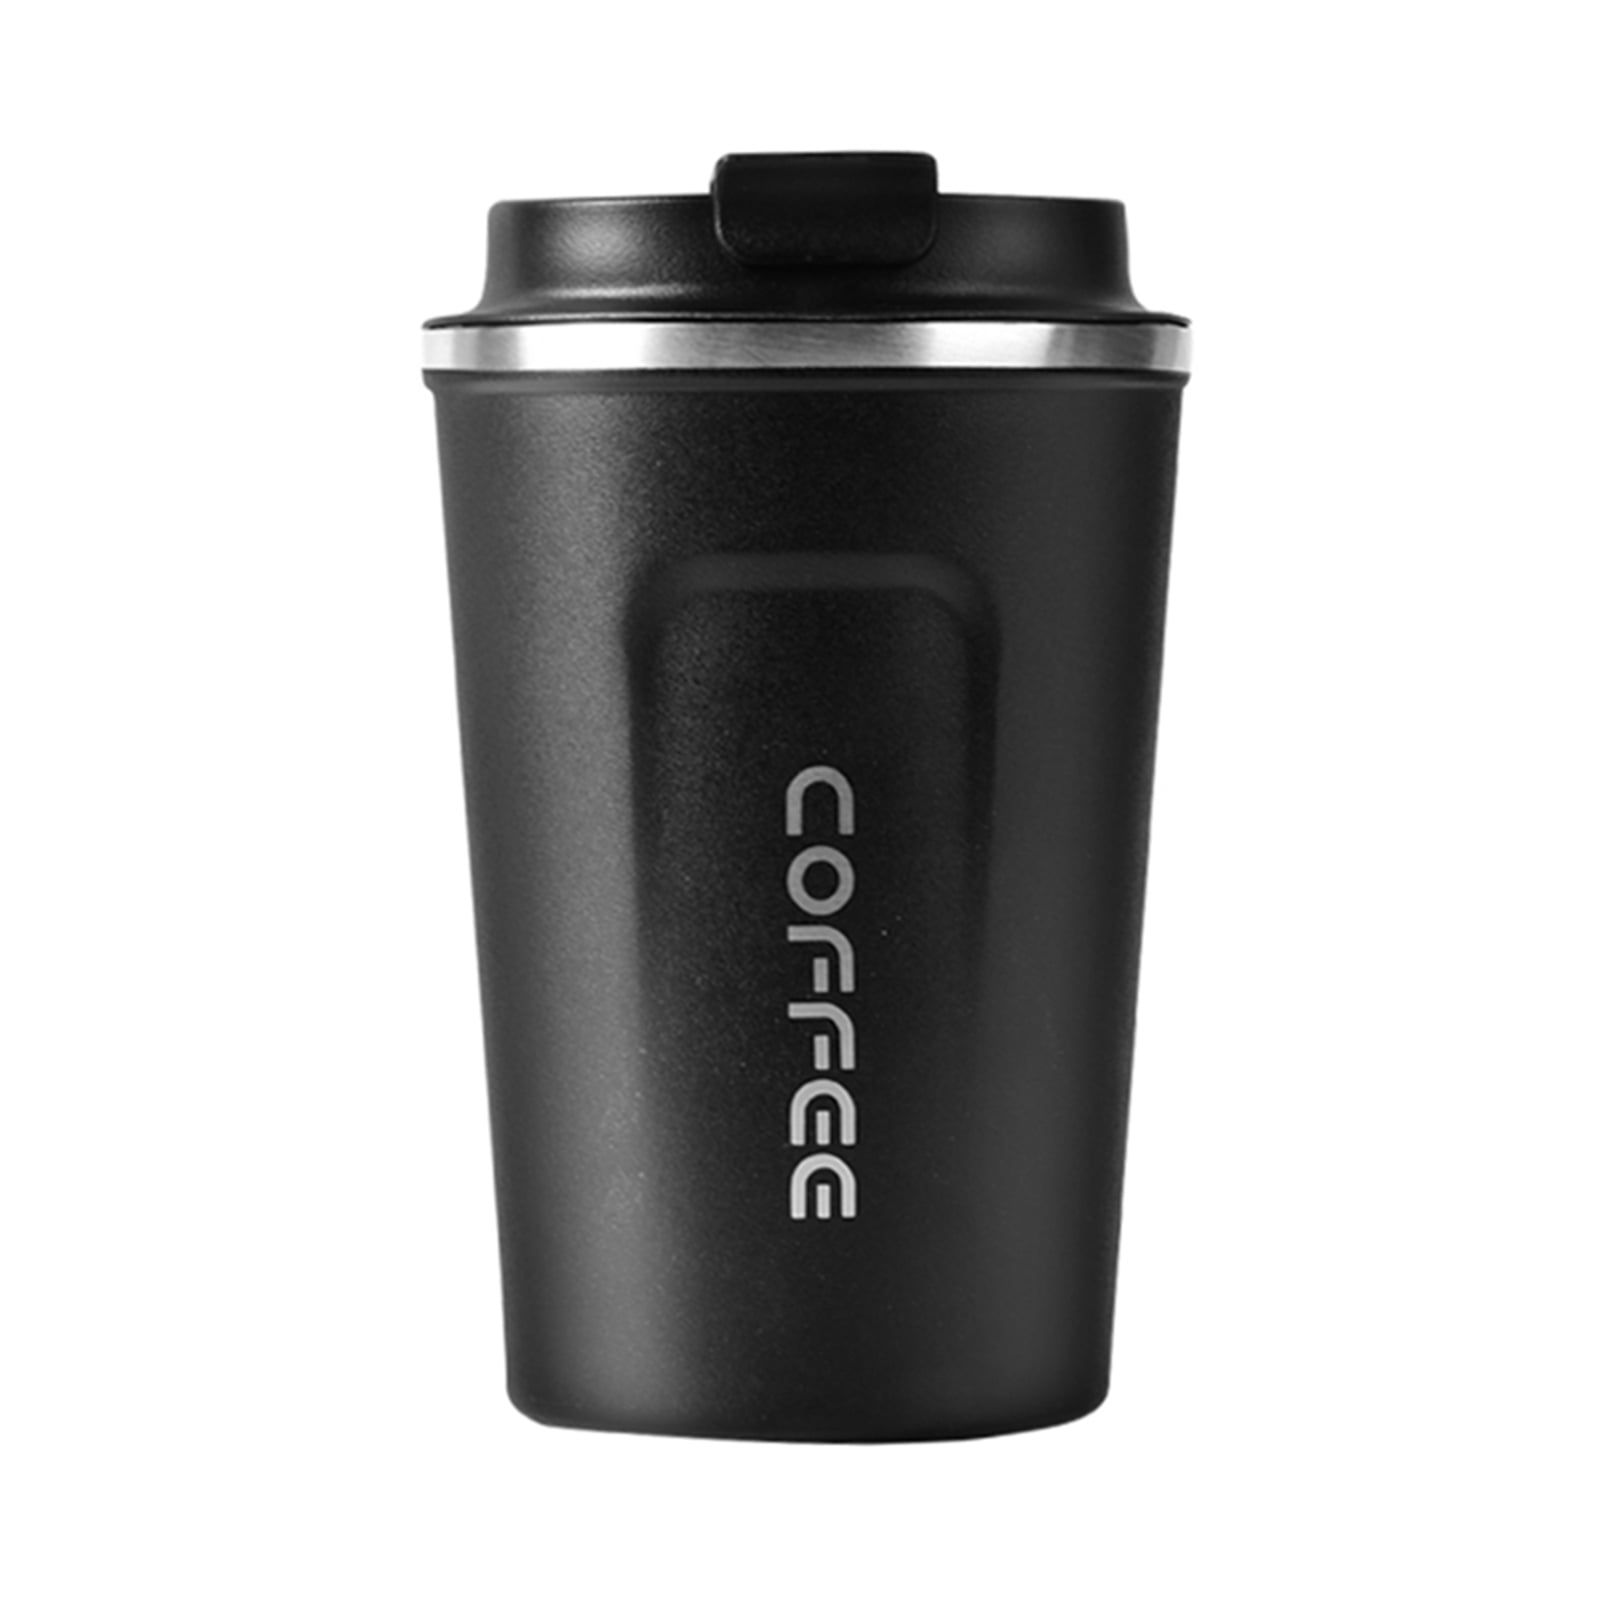 Stainless Steel Portable Leakproof Insulated Thermal Travel Coffee Mug Cup